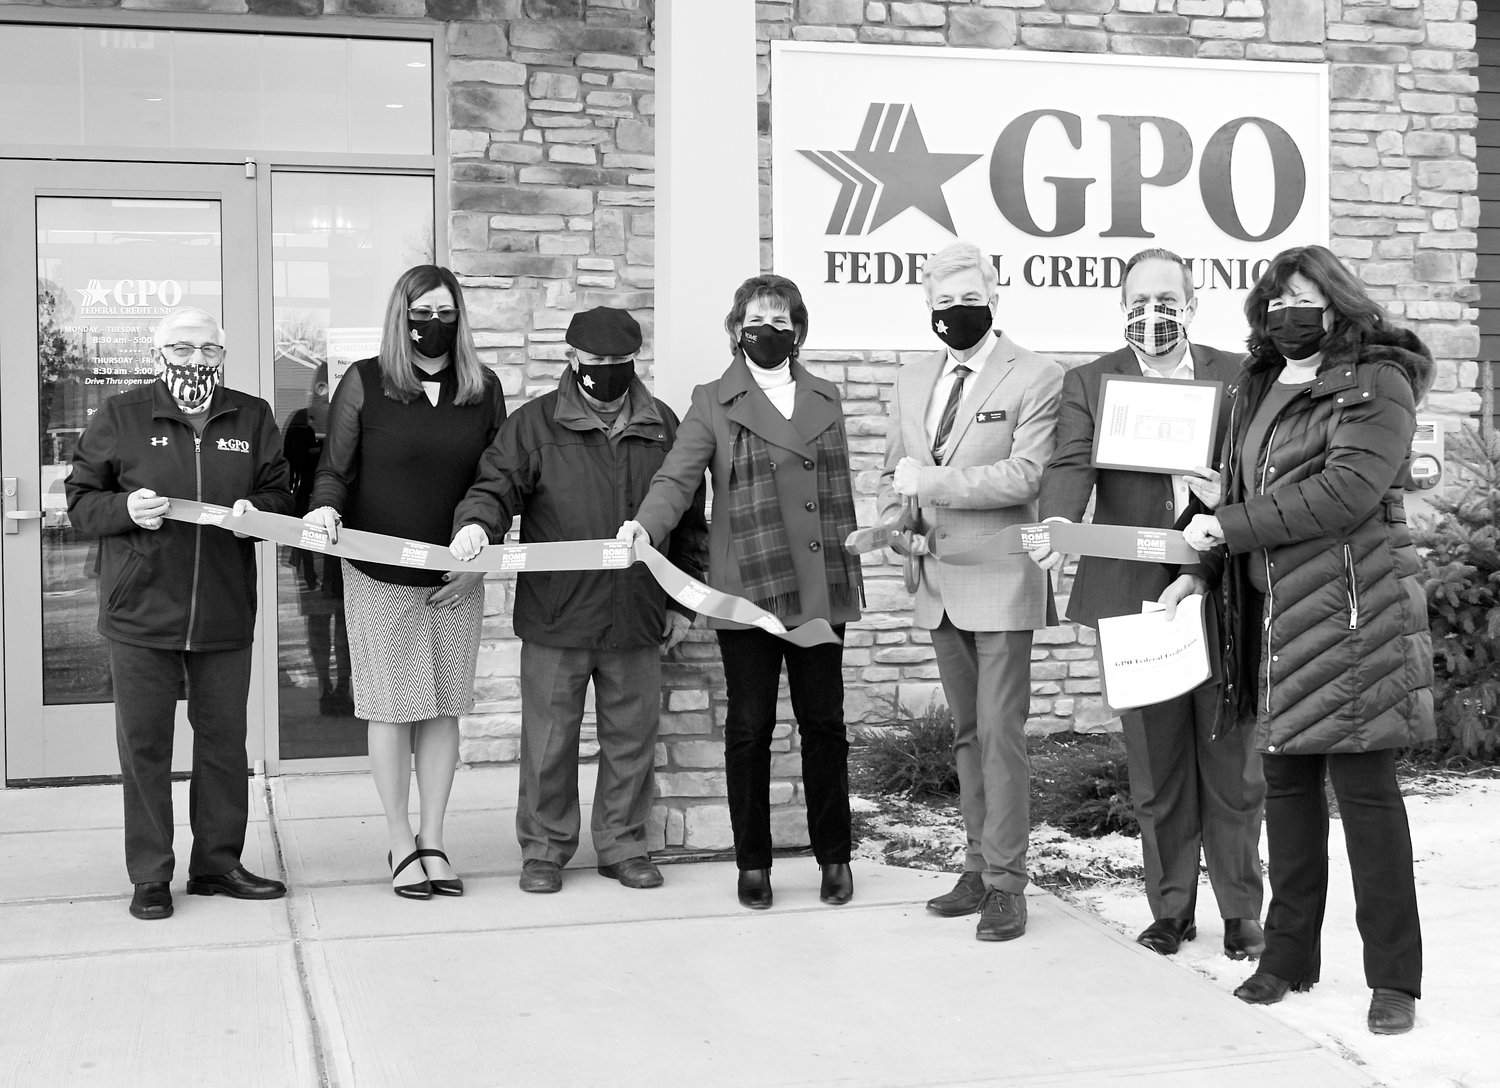 OPEN FOR BUSINESS — Officials with GPO Federal Credit Union, members of the Rome Area Chamber of Commerce and local dignitaries gather on Monday for a ribbon-cutting ceremony to formally open the new GPO branch at 1701 N. James St. Following the ribbon cutting ceremony, Greater Rome Utica Chapter Military Offices Association of America (GRUC-MOAA) and Rome Food Pantry joined officials for a ceremonial check presentation. The new full-service branch with a drive-thru ATM offers an array of loan and deposit products, while the conference room will host the credit union’s free Financial Education workshops and Financial Counseling sessions.